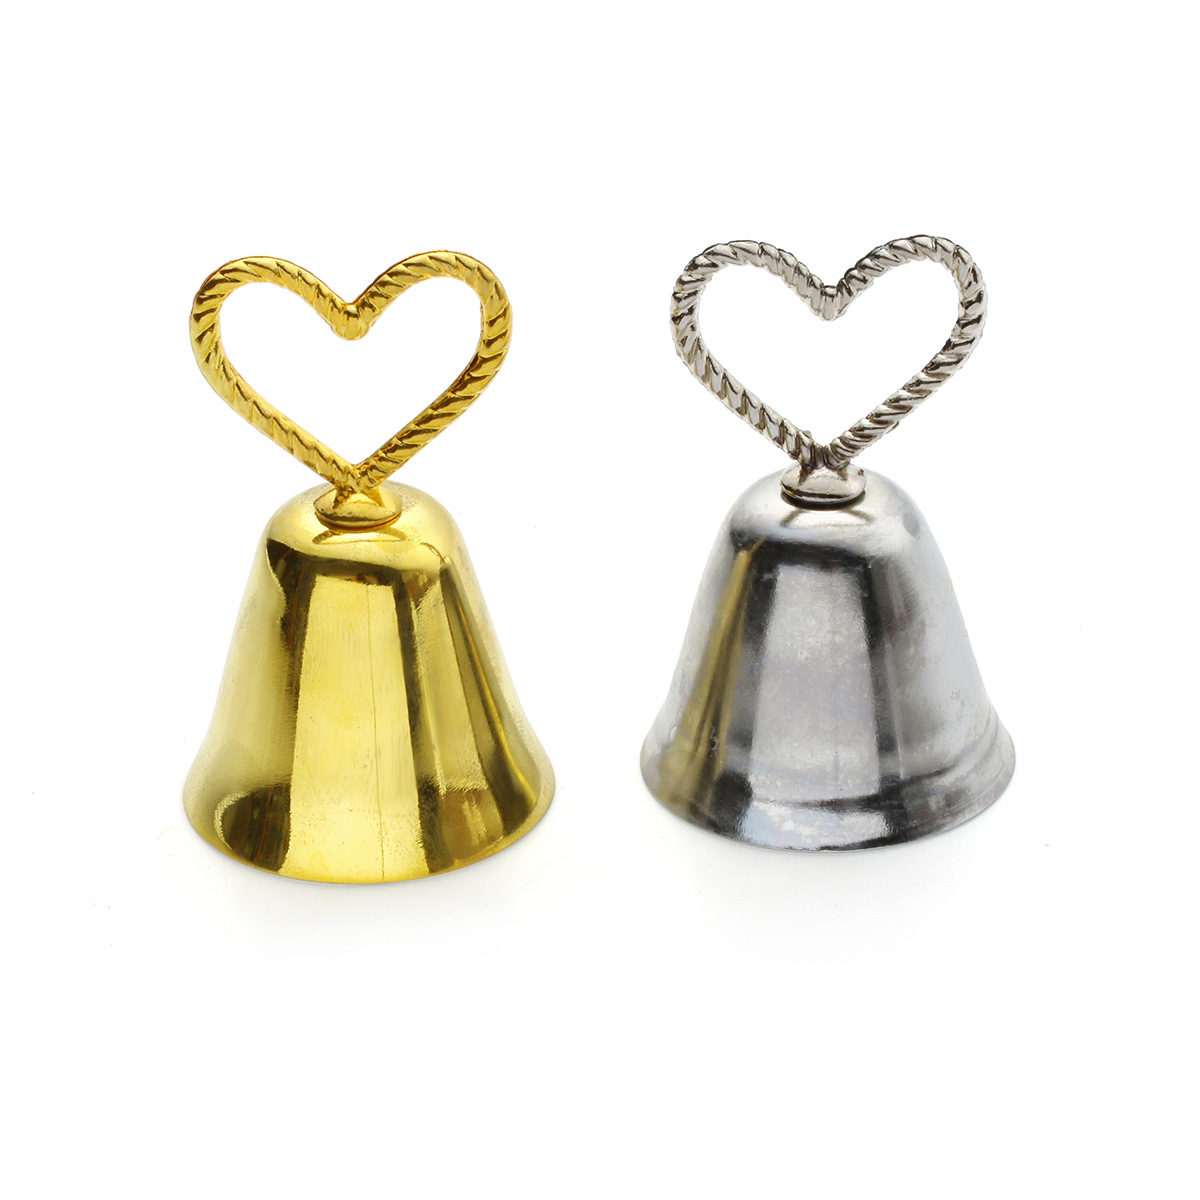 Other Wedding Favors size 6X34cm beautiful gold silver kissing bell place card holder photo holder table decoration party